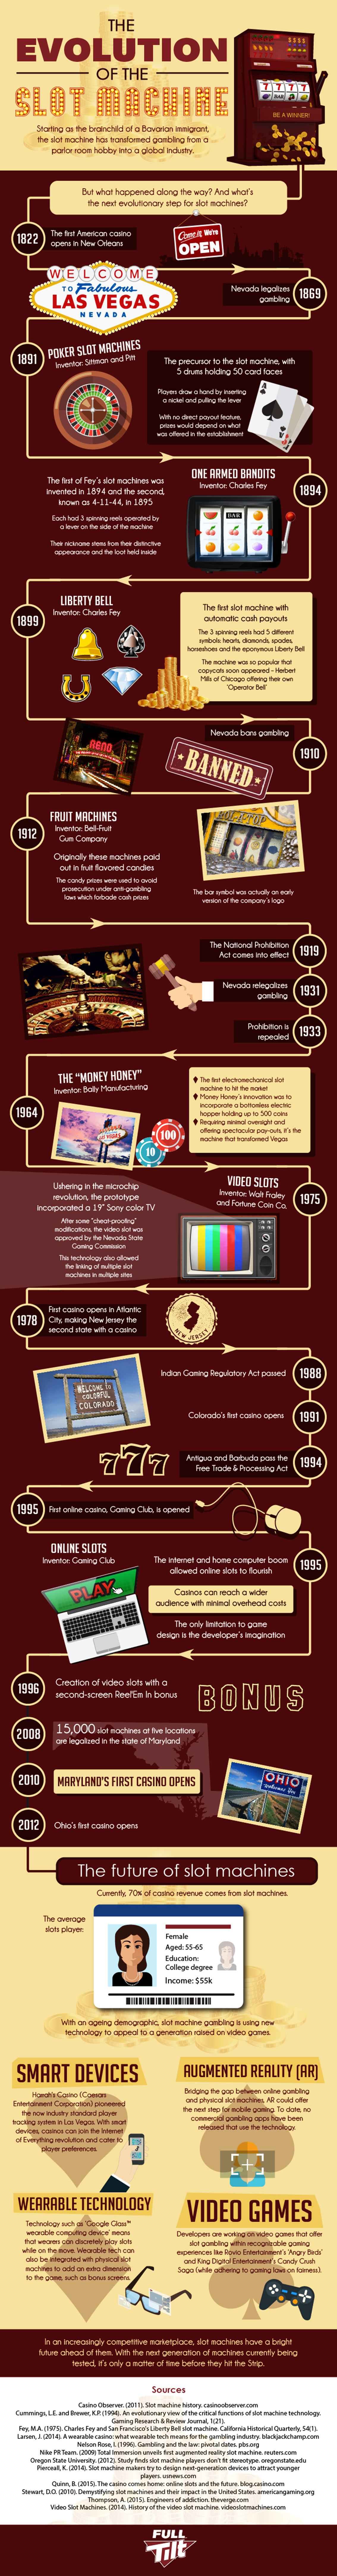 Evolution of the Slot Machines Infographic